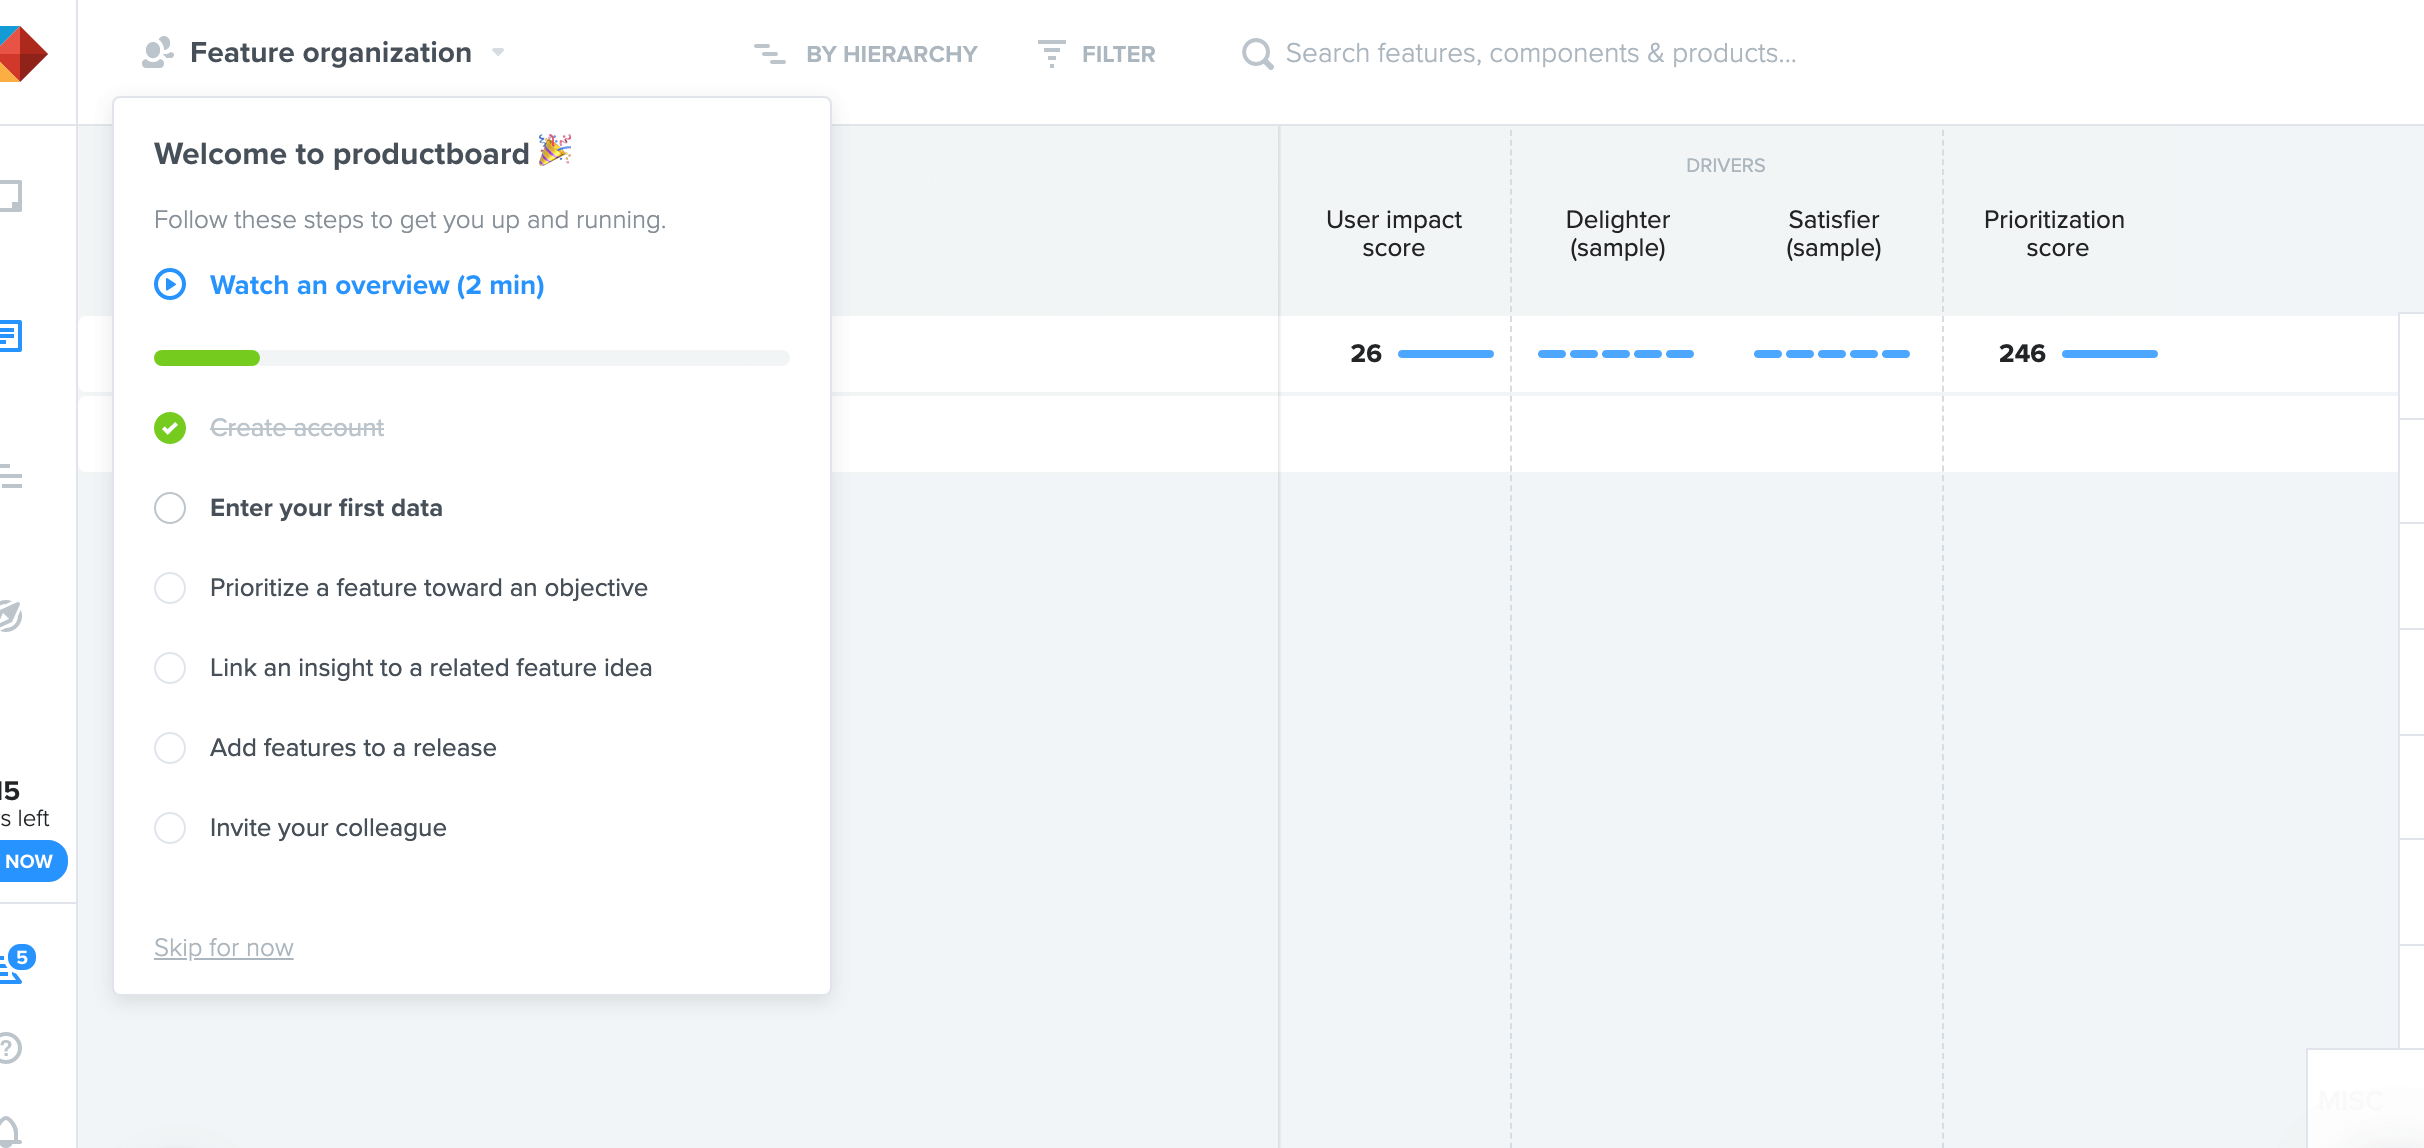 Productboard's onboarding checklist